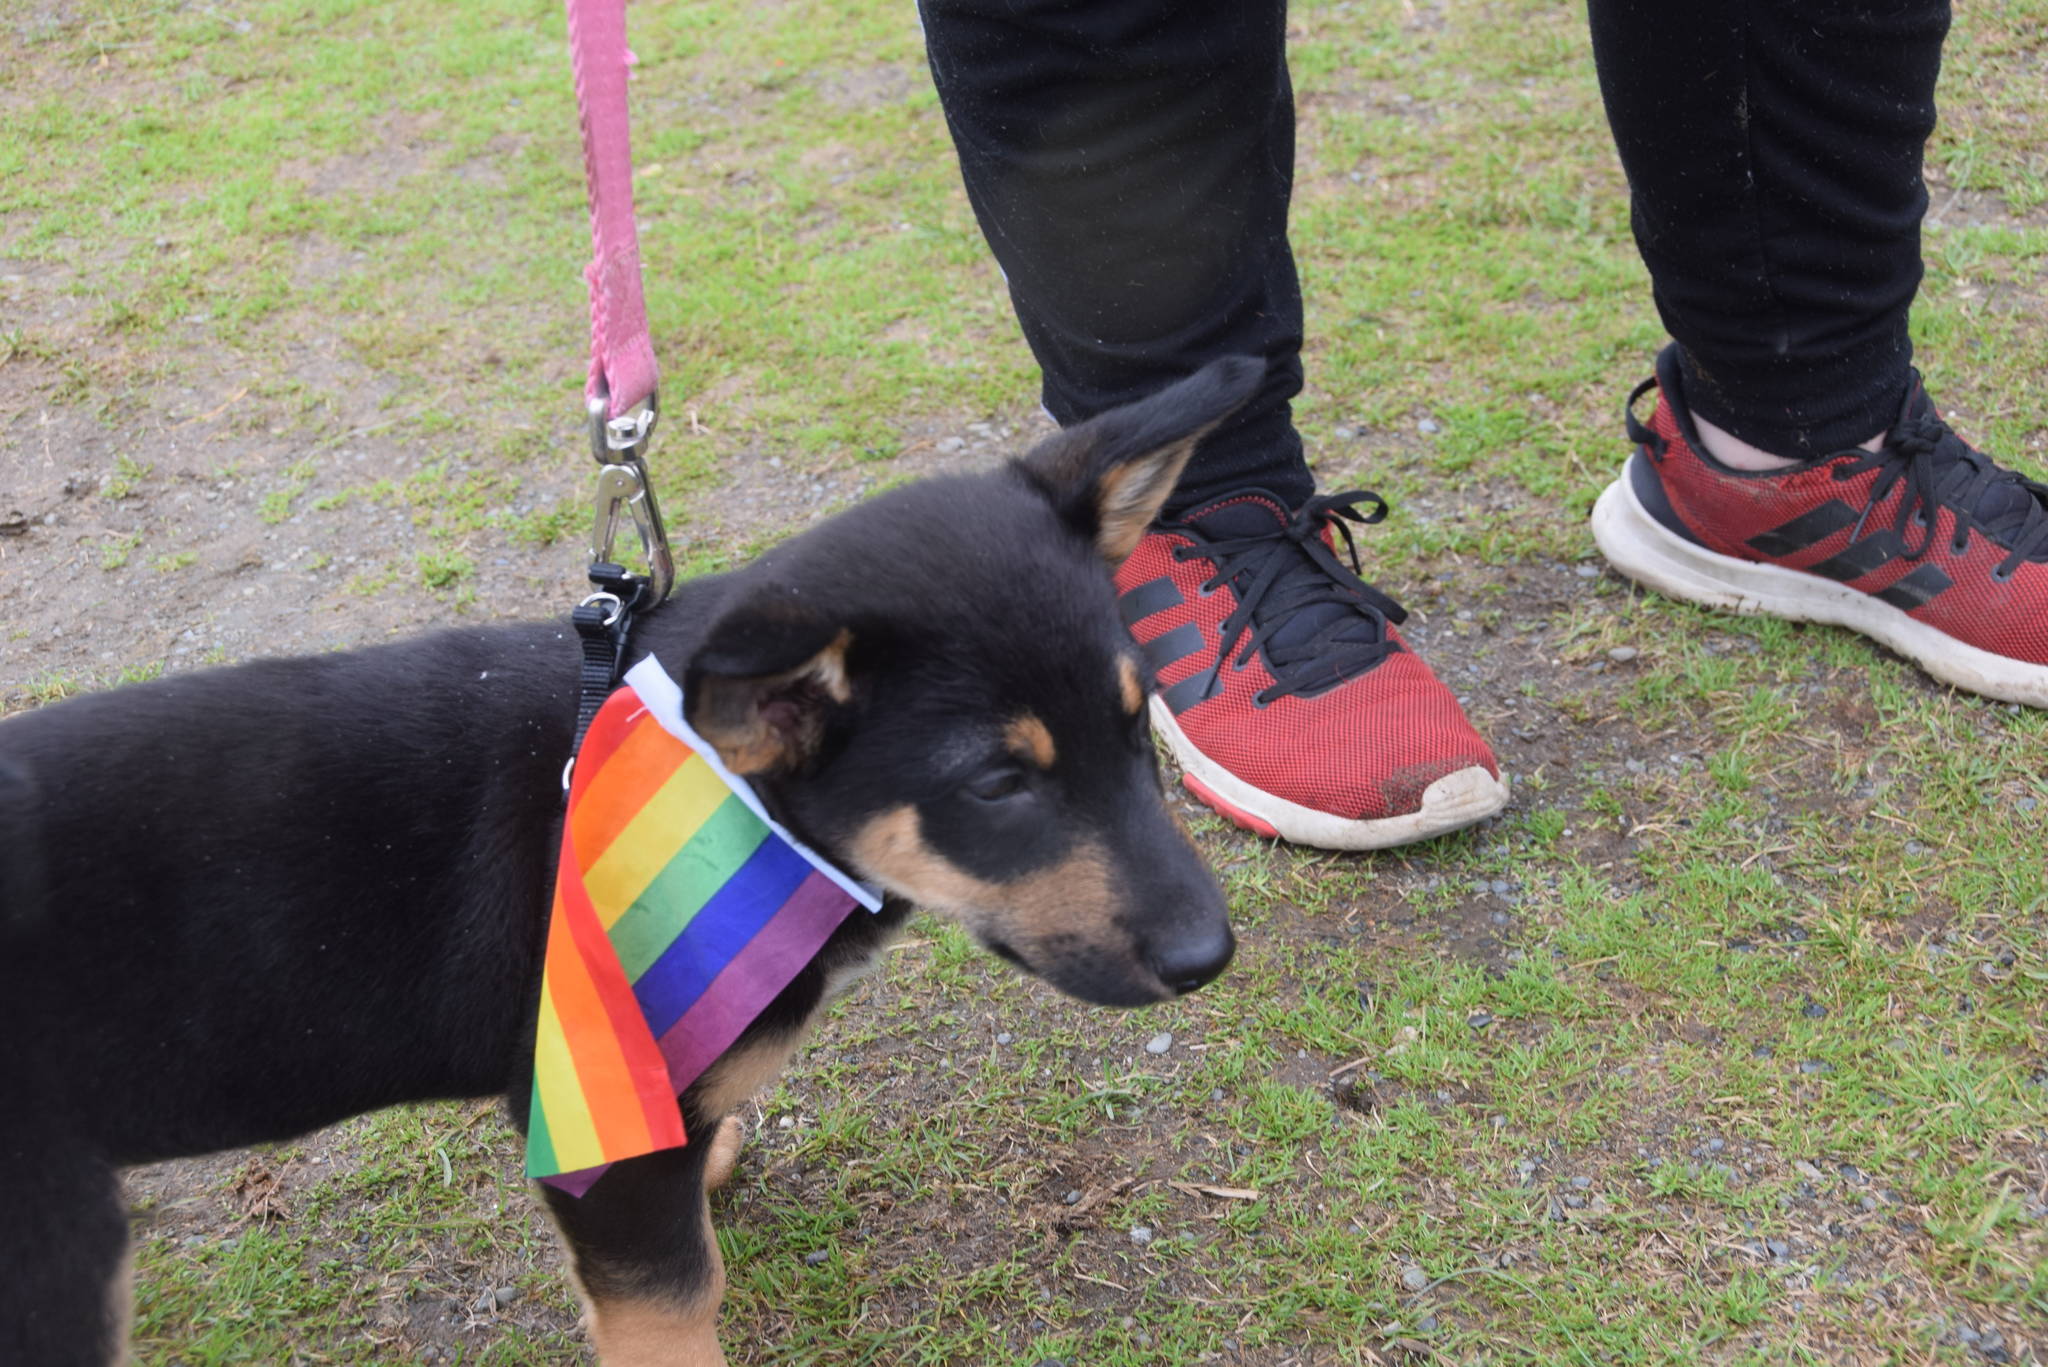 Ryder the puppy shows his pride during the 2019 Soldotna Pride Celebration in Soldotna Creek Park on Saturday, June 15, 2019. (Photo by Brian Mazurek/Peninsula Clarion)